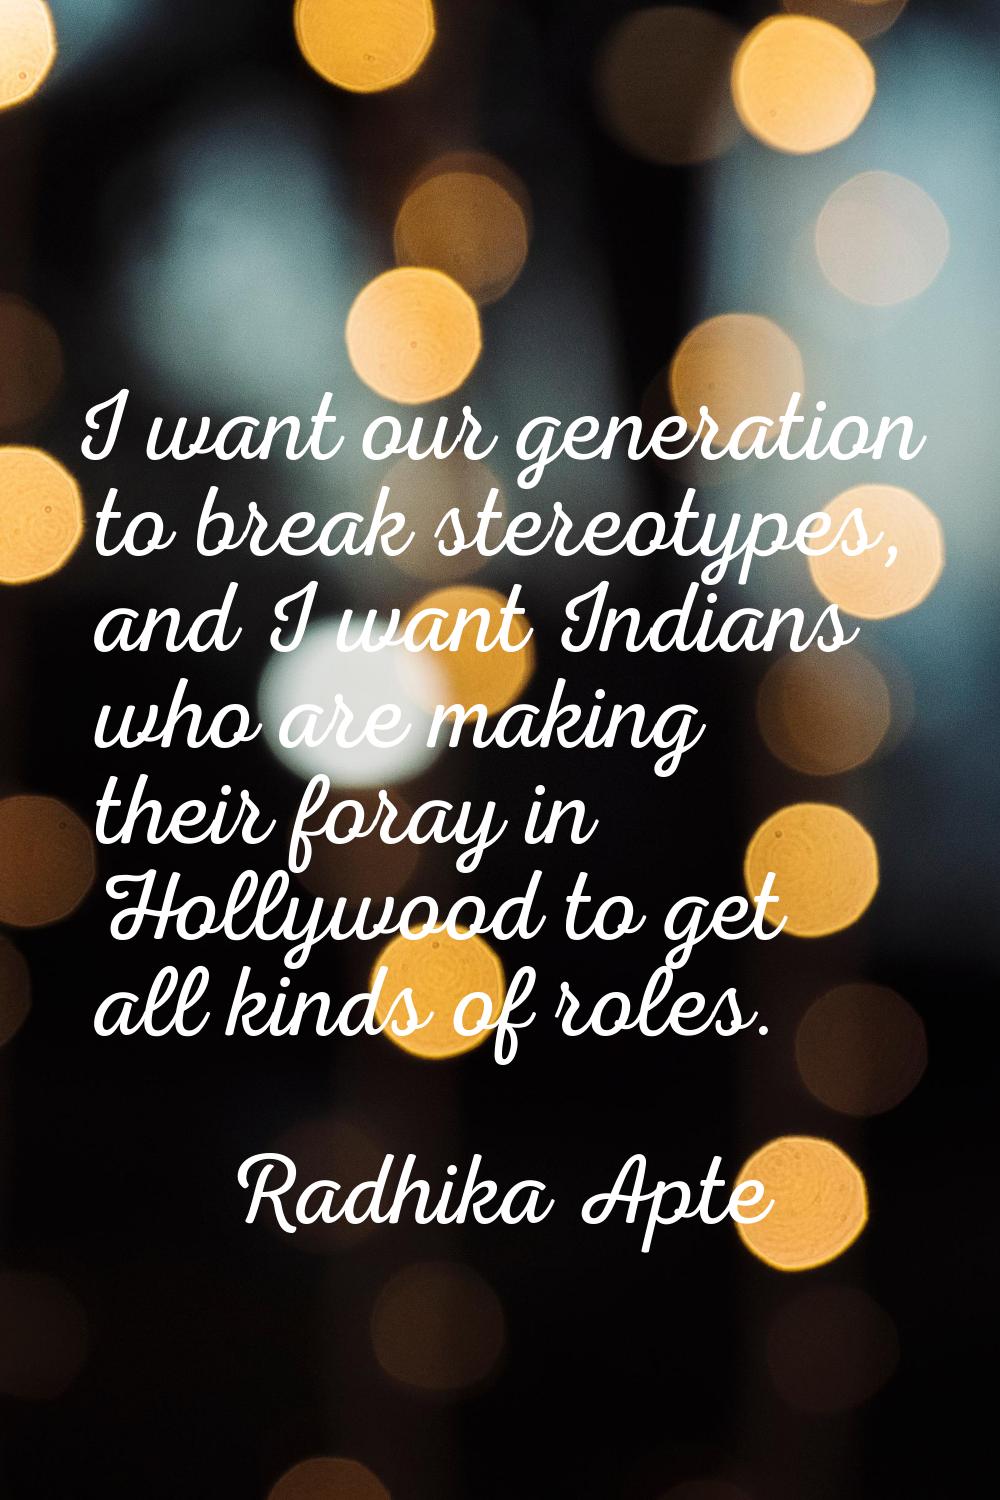 I want our generation to break stereotypes, and I want Indians who are making their foray in Hollyw